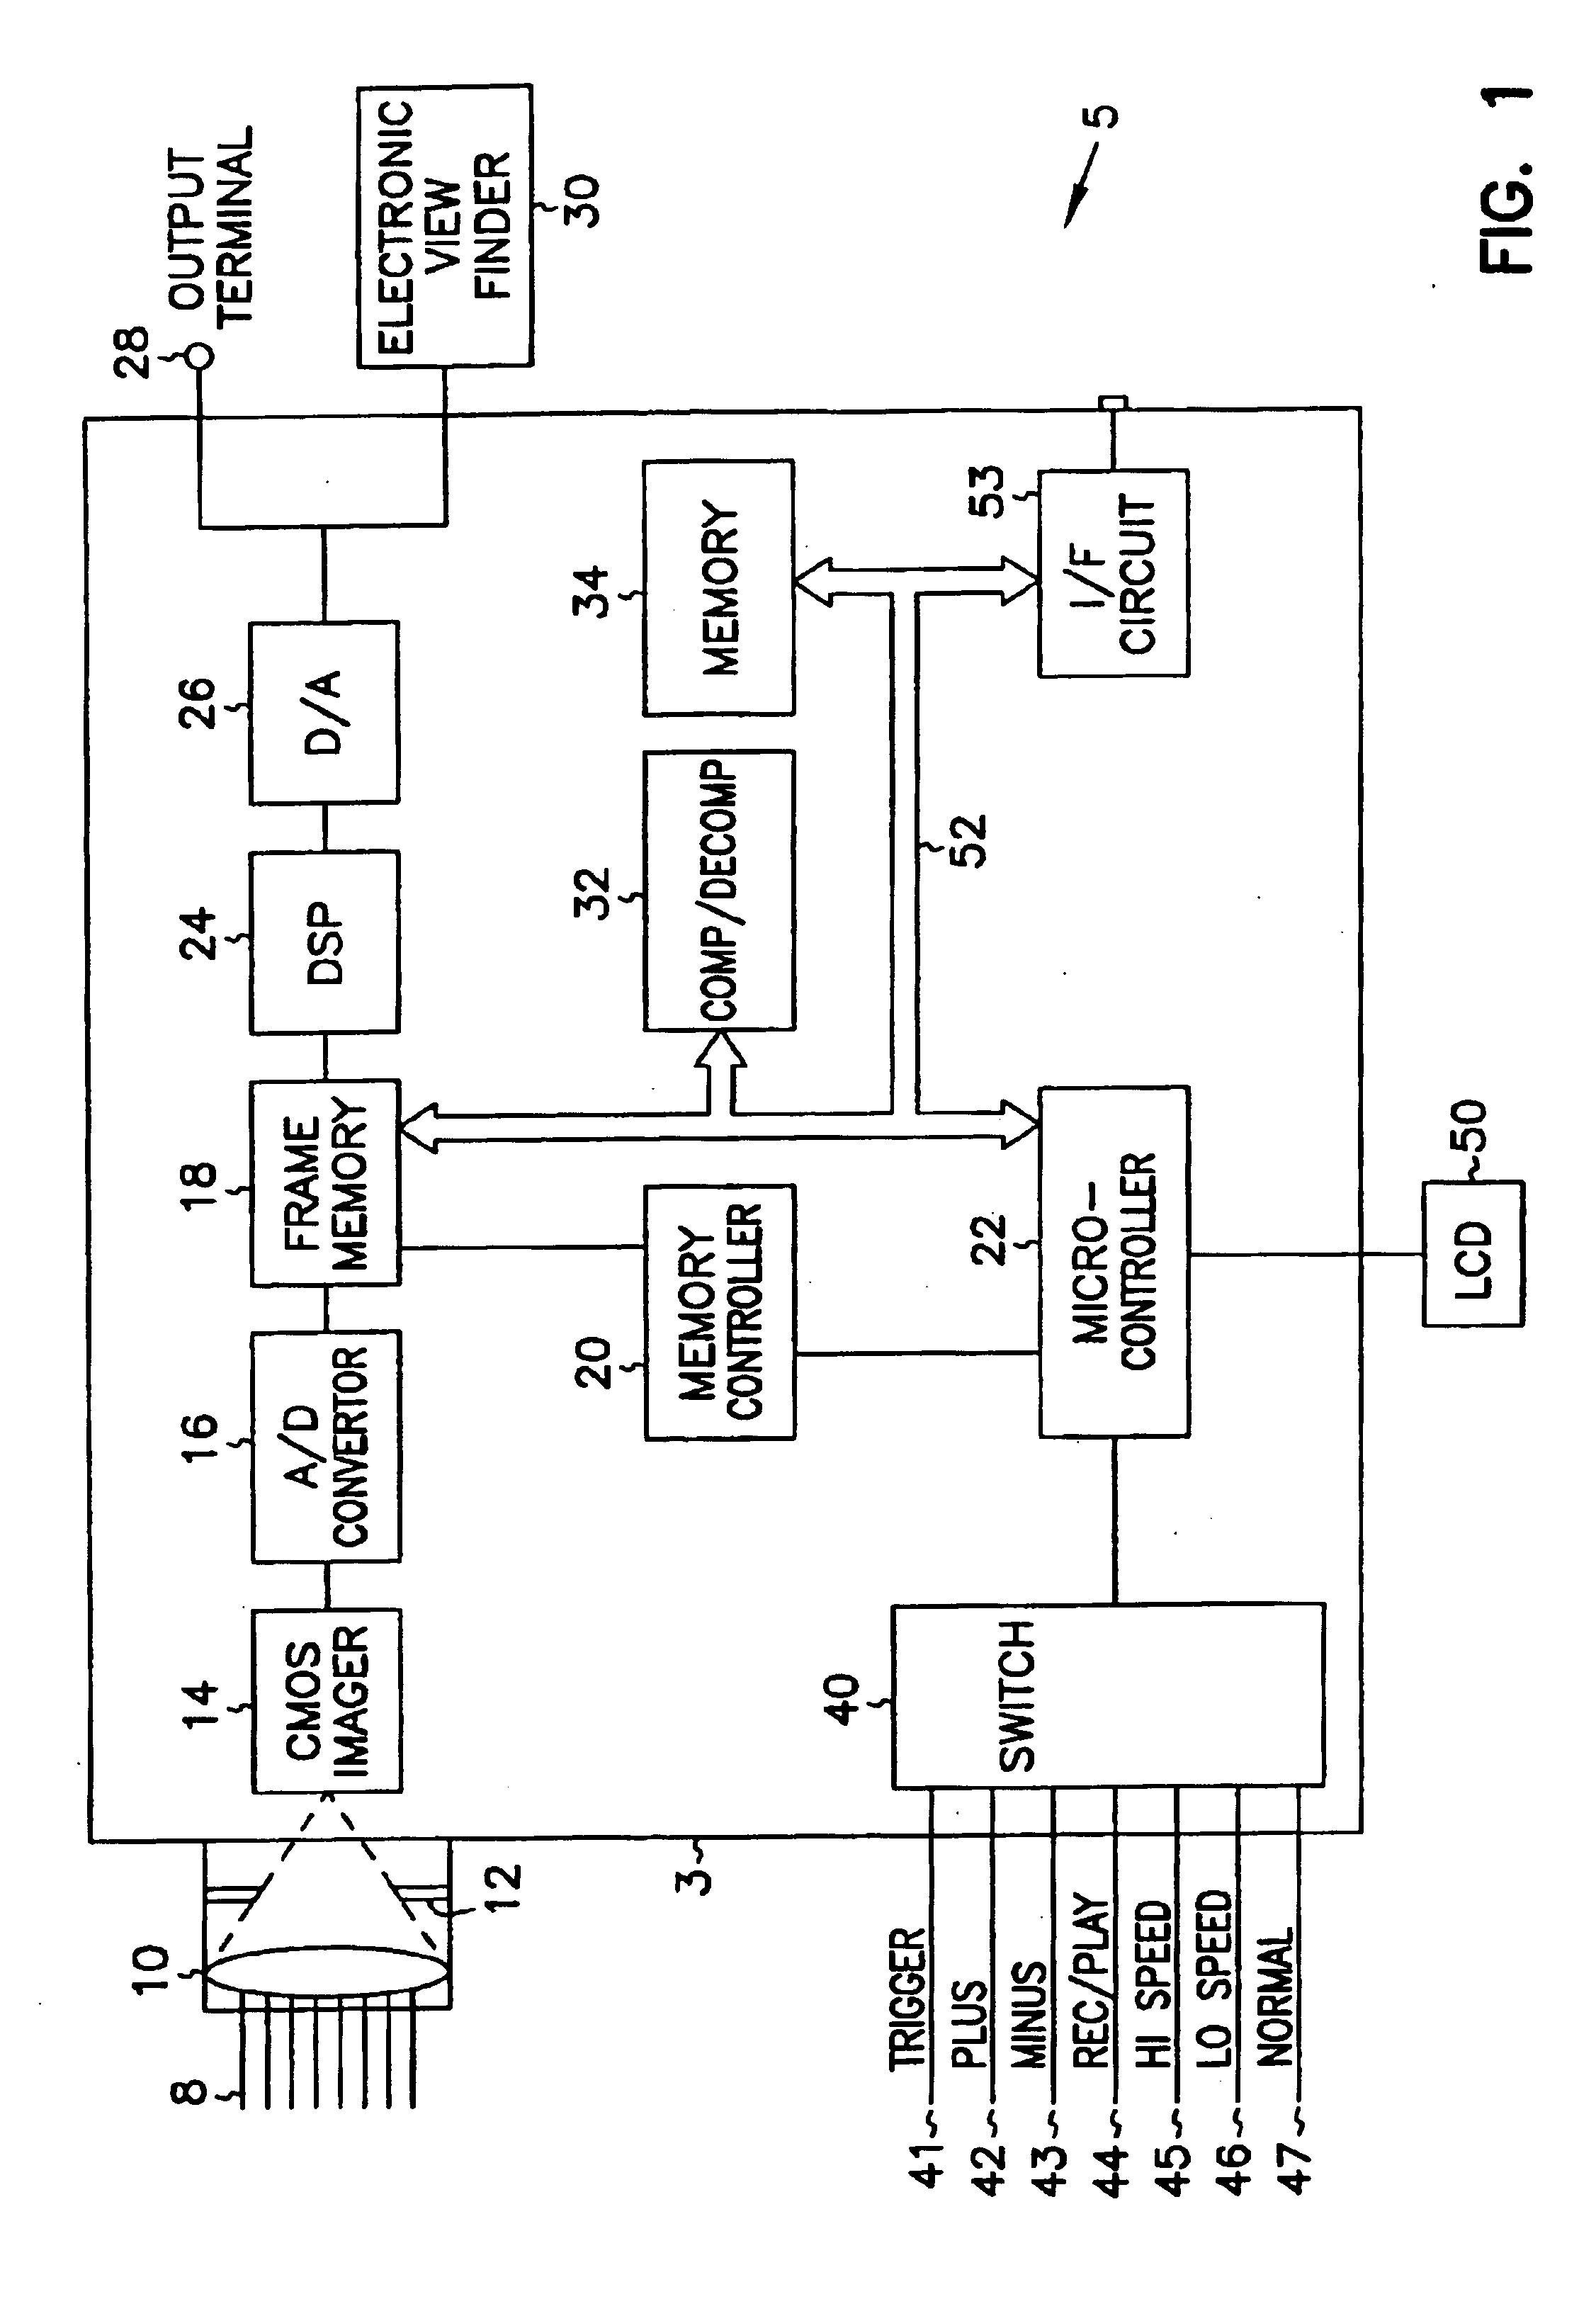 CMOS imager with integrated non-volatile memory